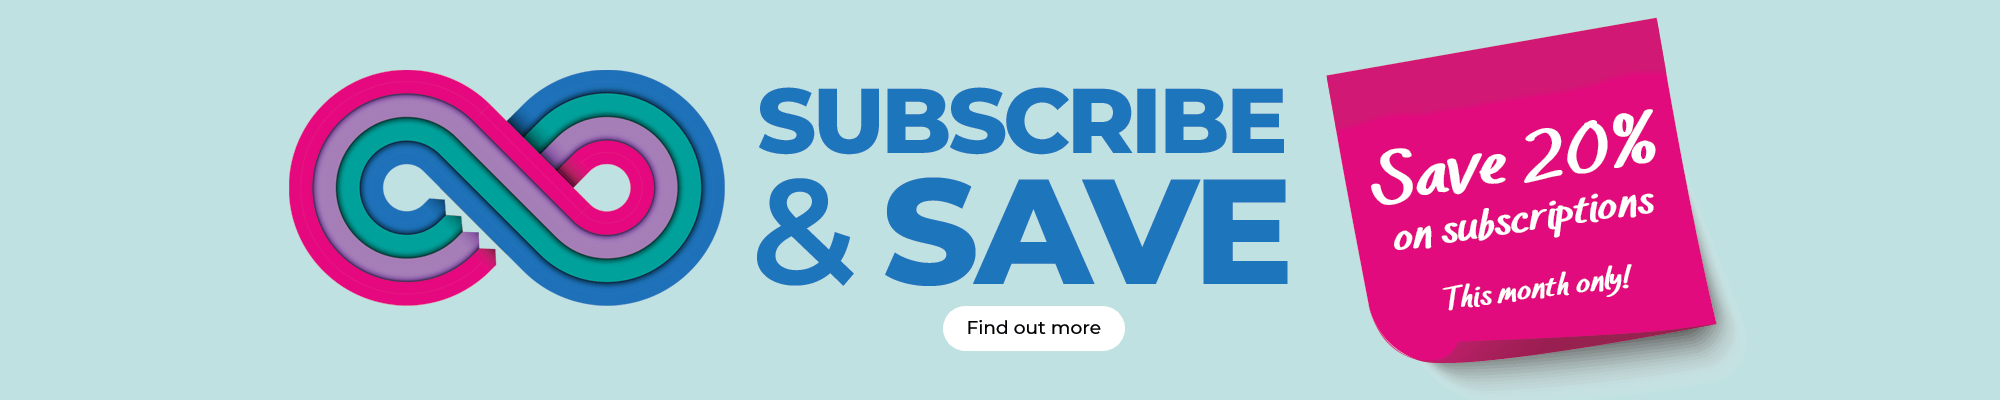 Subscribe & Save - Save 20% on subscriptions this month only! Find out more.